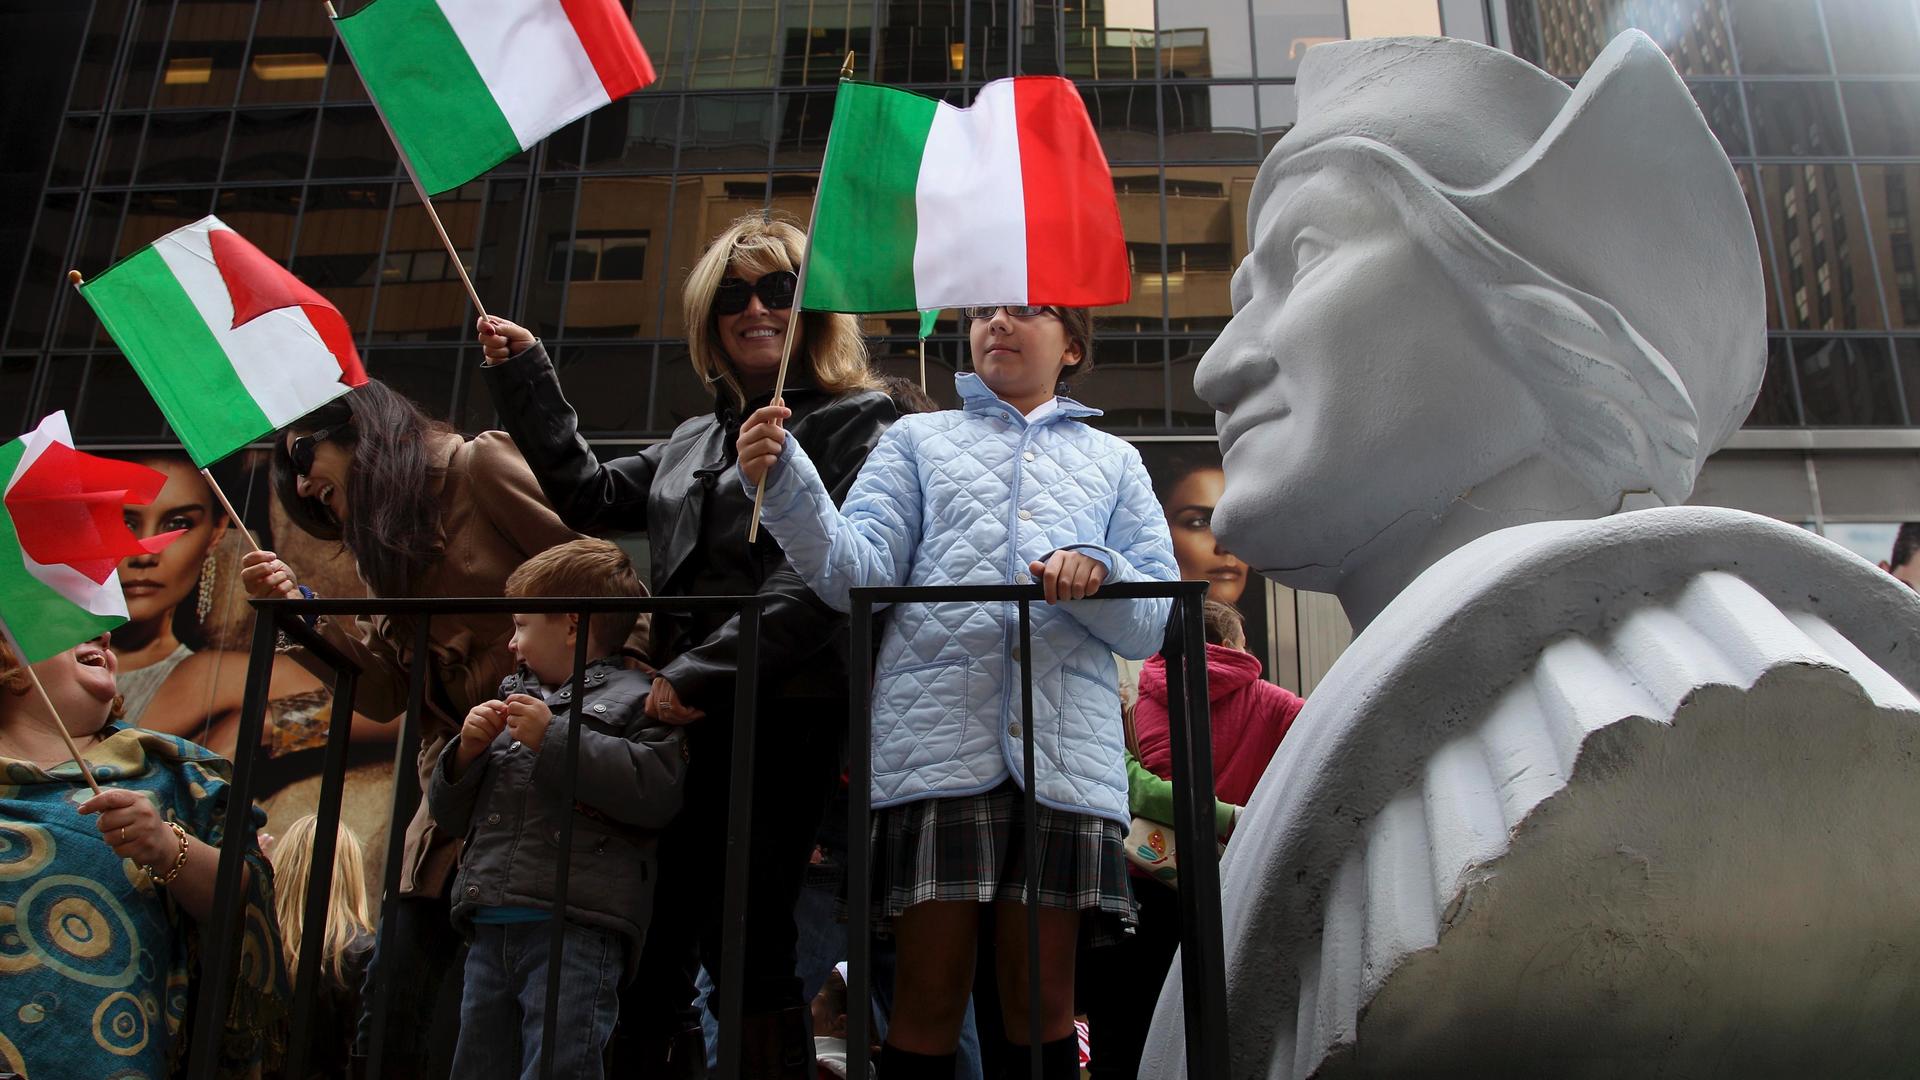 People ride on a float with a large bust of Christopher Columbus during the Columbus Day parade in New York, Oct. 8, 2012. The Oct. 12 federal holiday dedicated to Christopher Columbus continues to divide those who view the explorer as a representative of